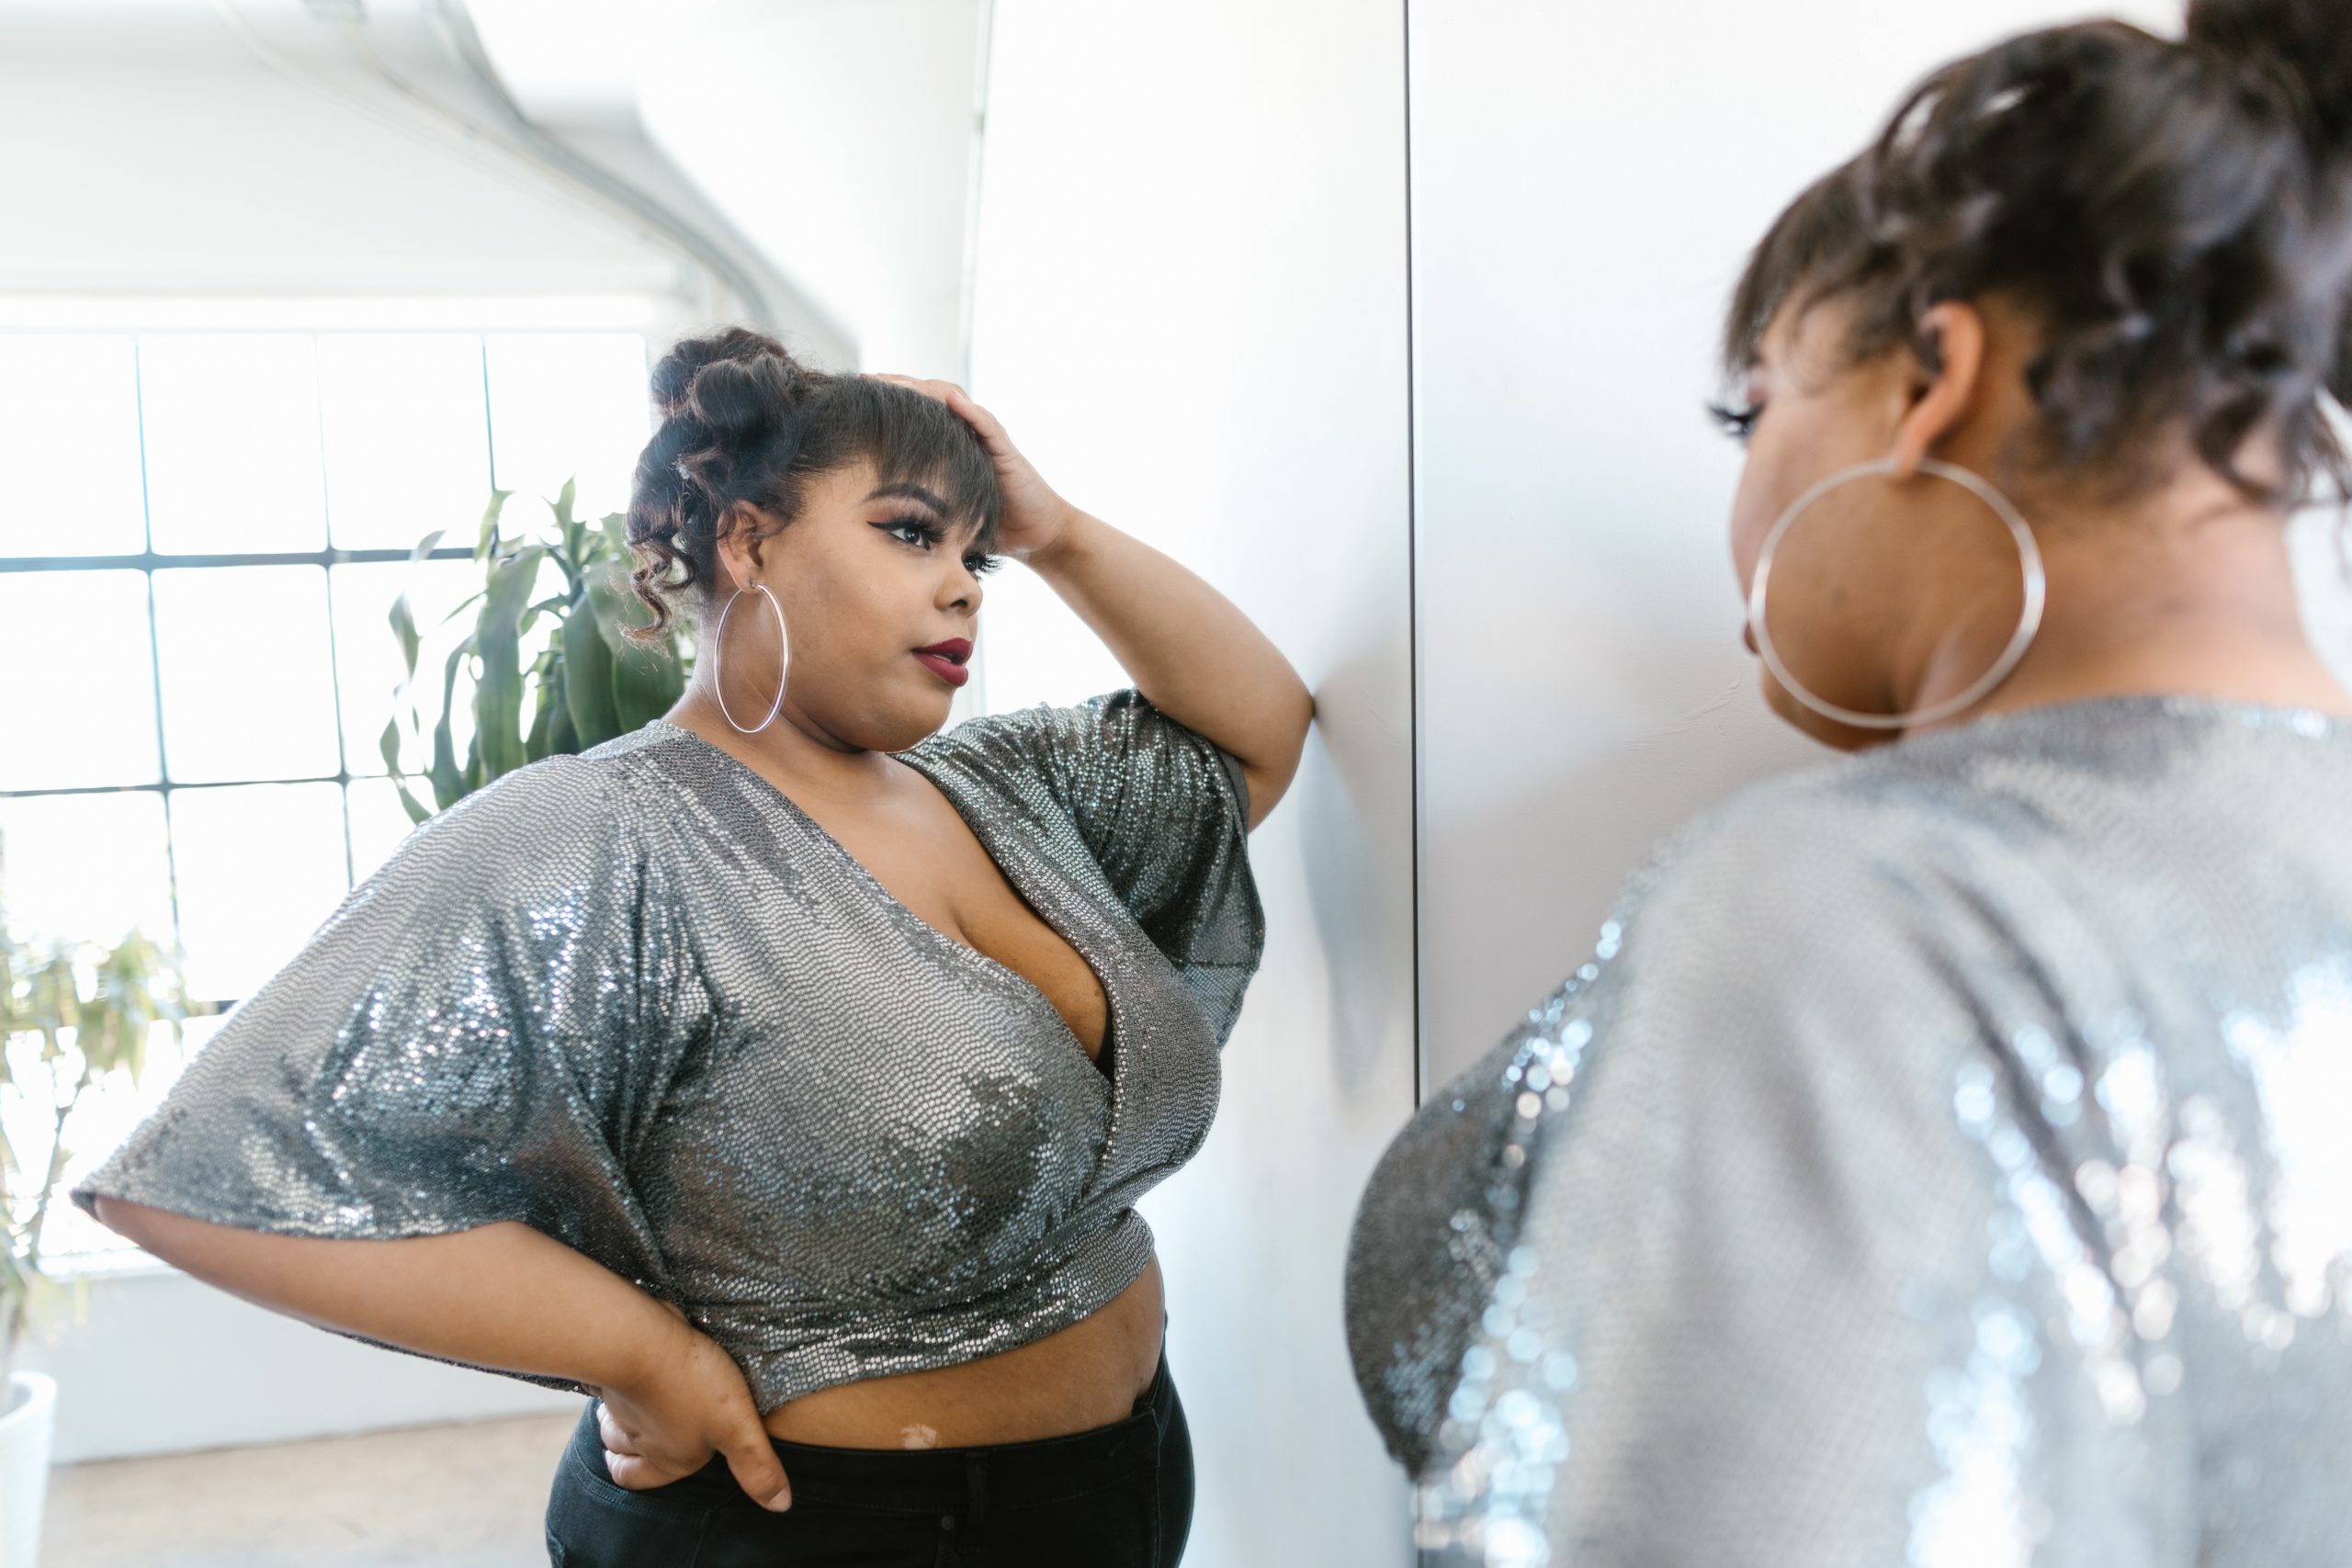 A woman in a sparkly silver crop top admiring herself in a mirror.